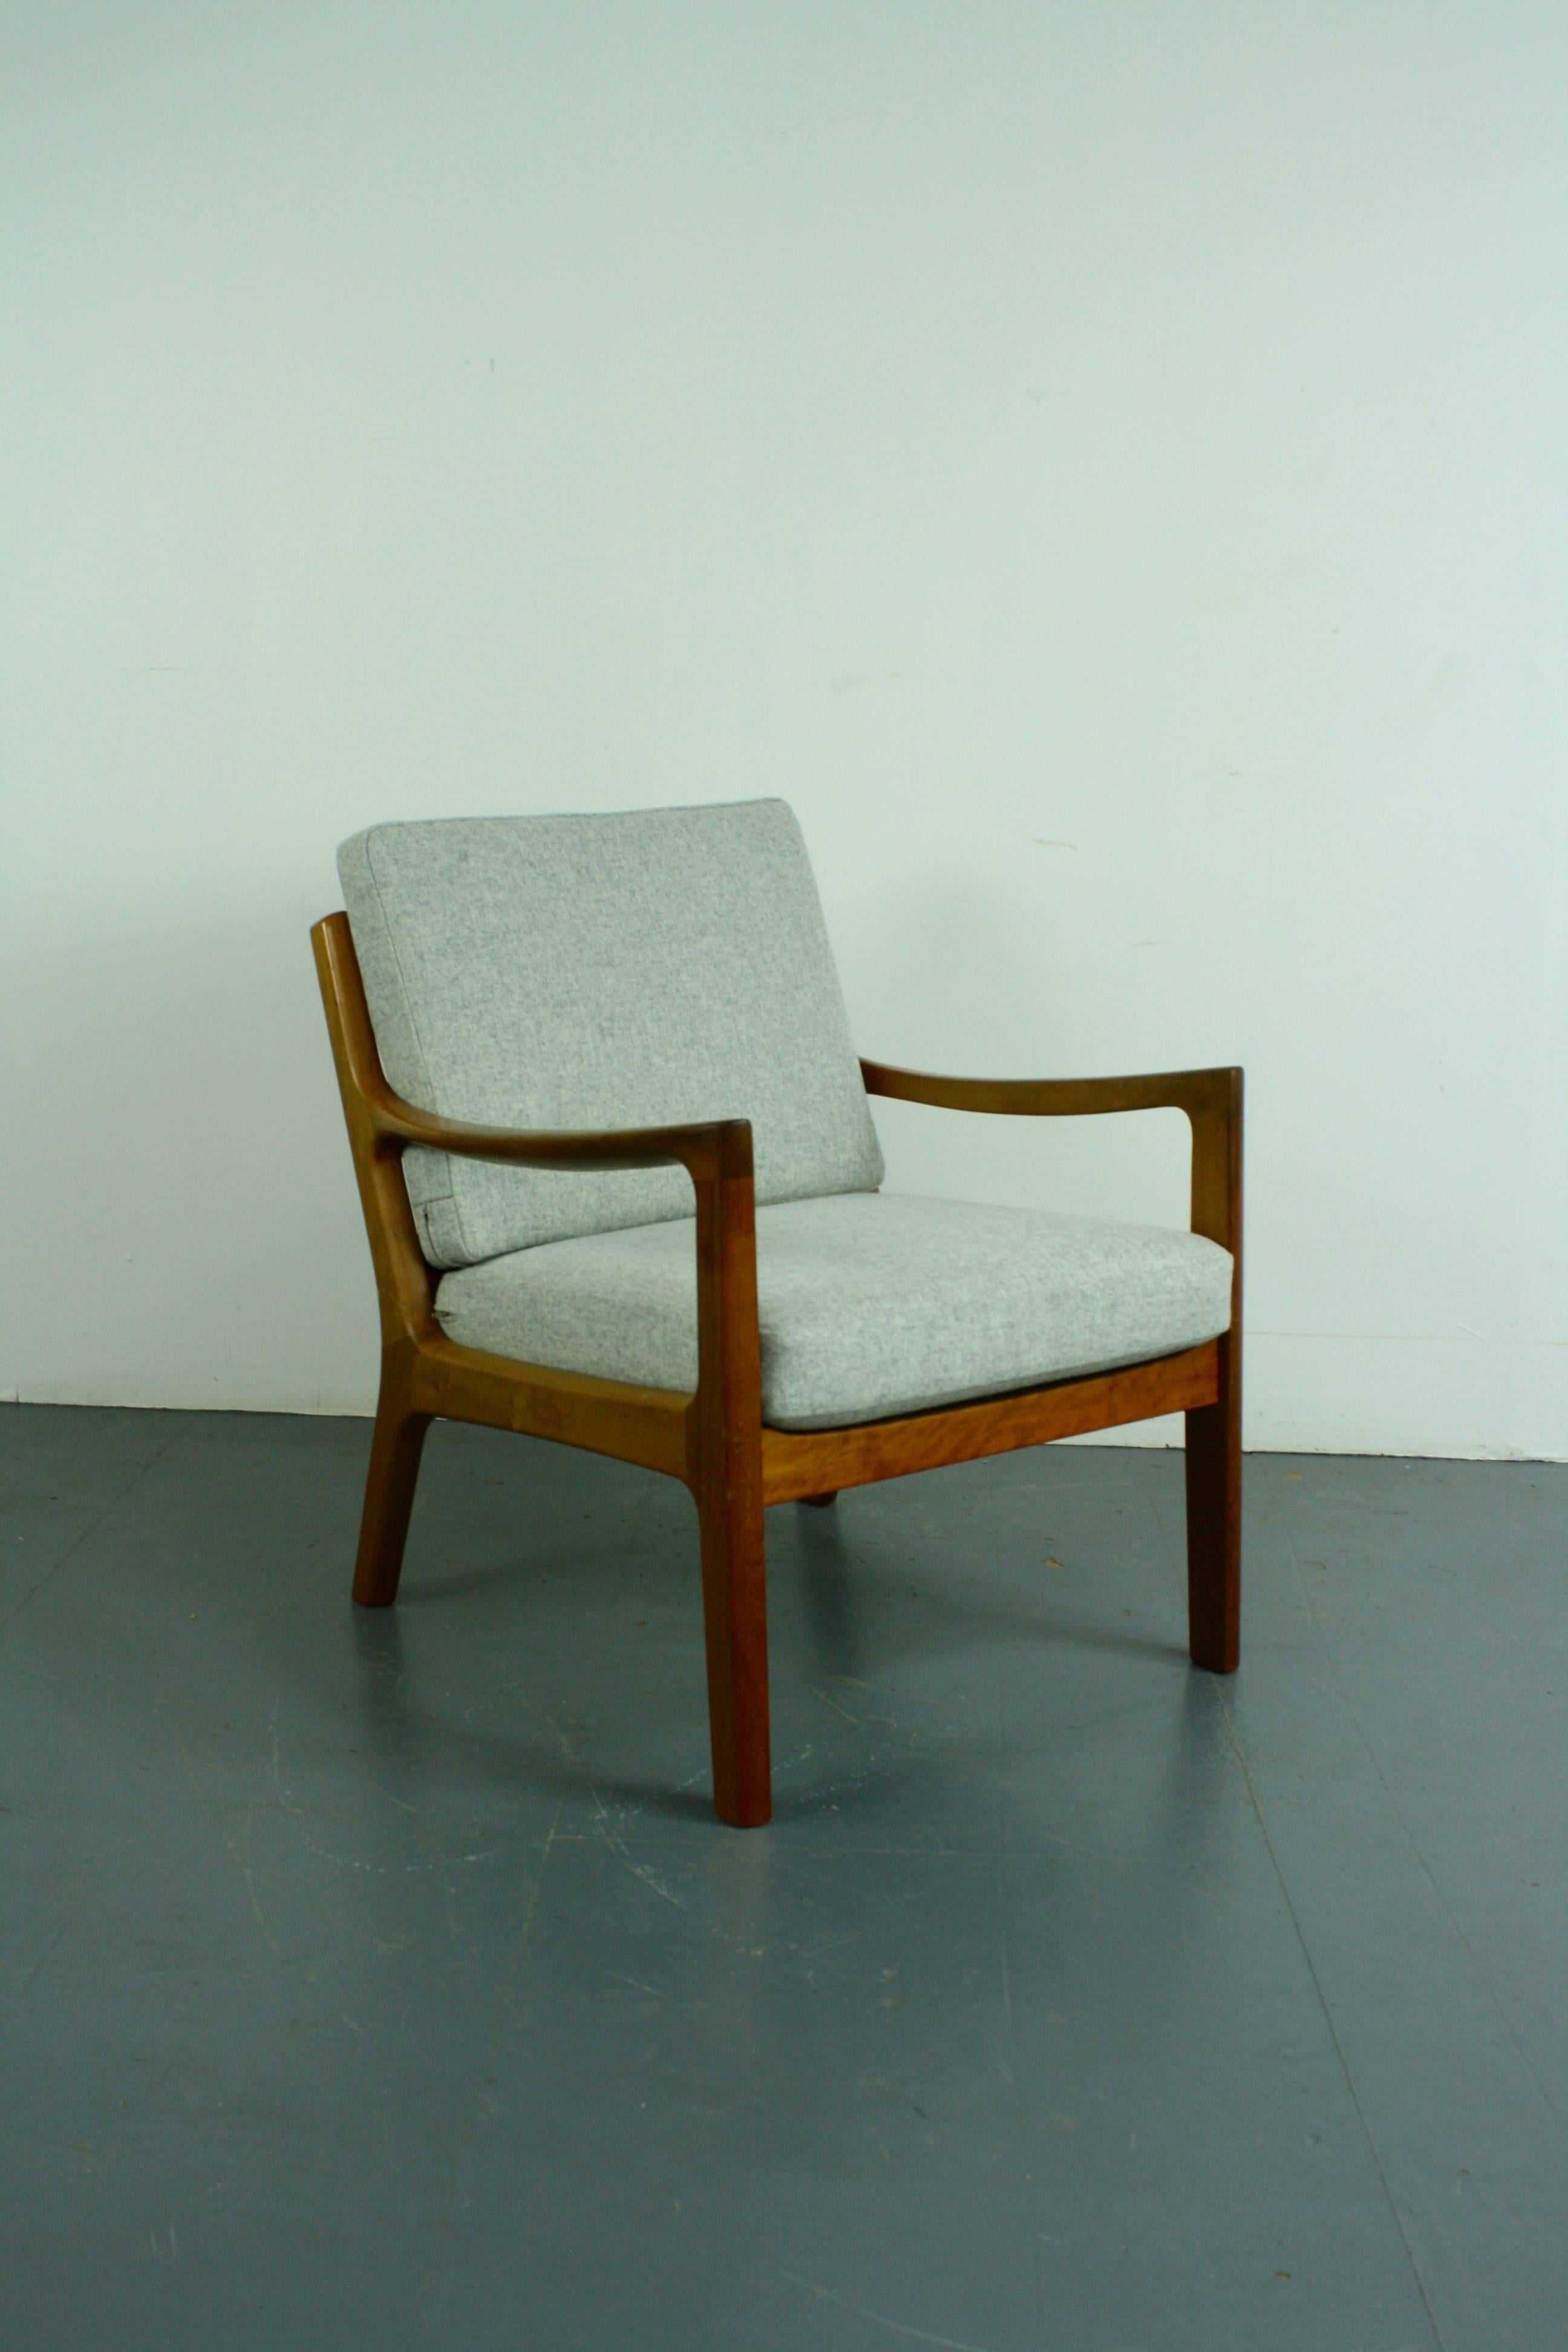 1960s teak lounge chair designed by Ole Wanscher for Peter Jeppeson. Solid teak, with beautifully designed curved arms. With two thick spring-loaded cushions, making the chair supremely comfortable, which have been newly upholstered in beautiful